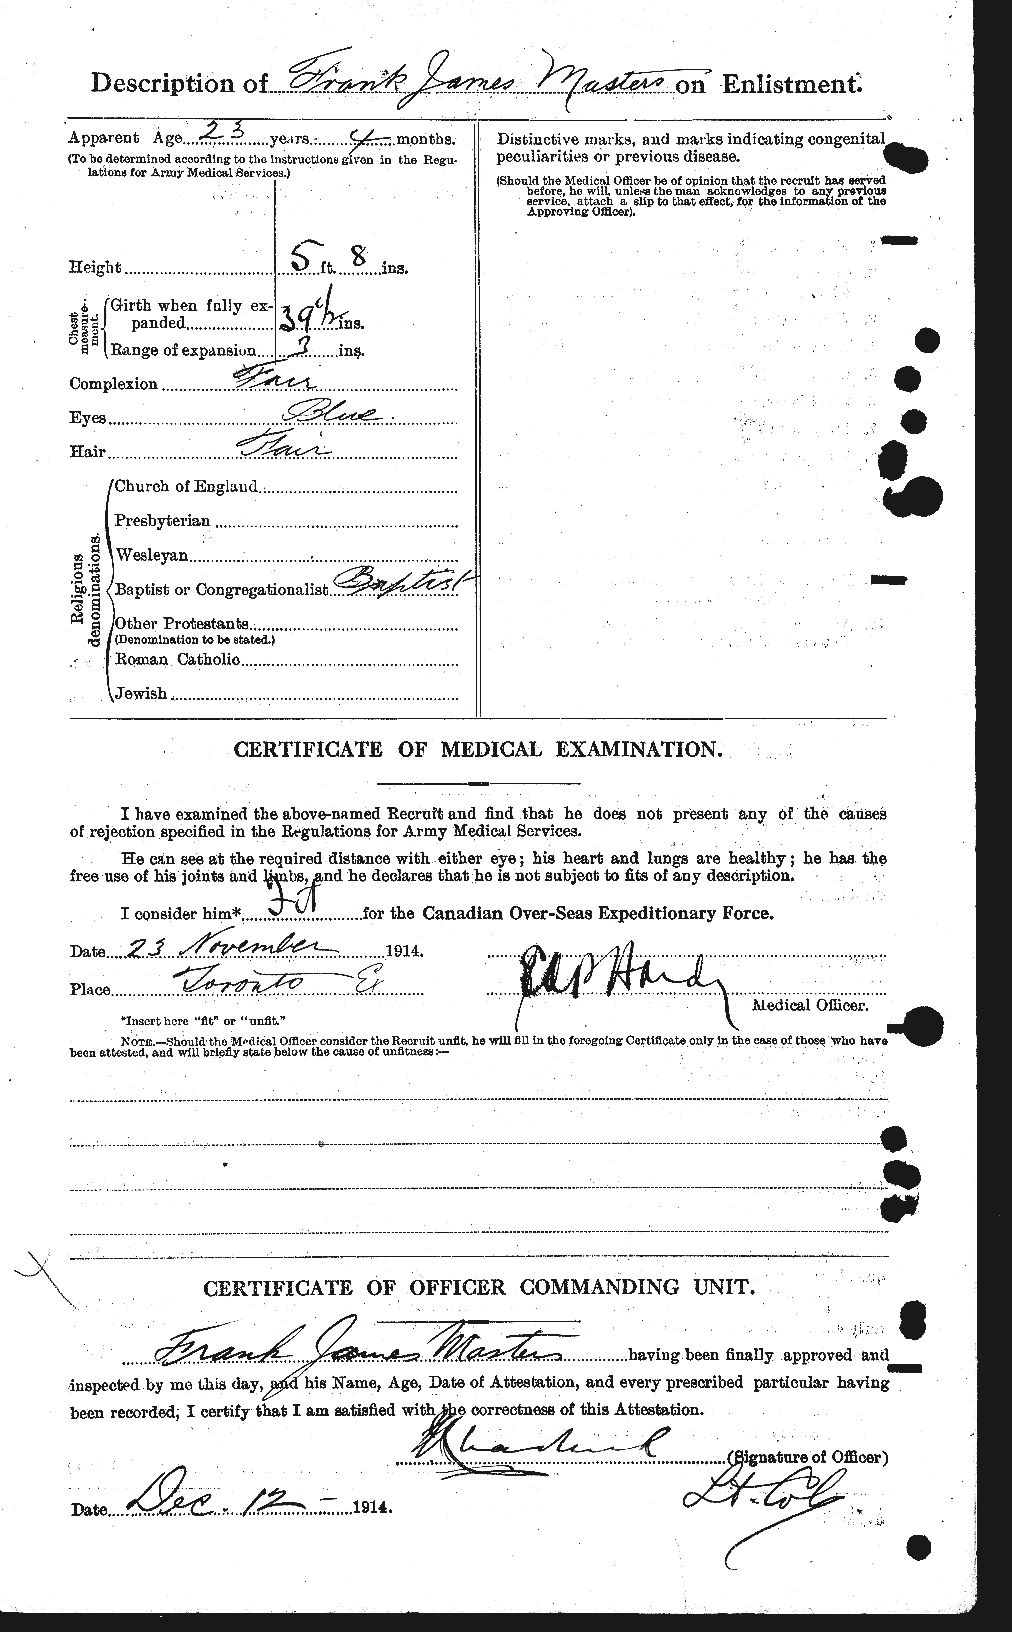 Personnel Records of the First World War - CEF 487320b